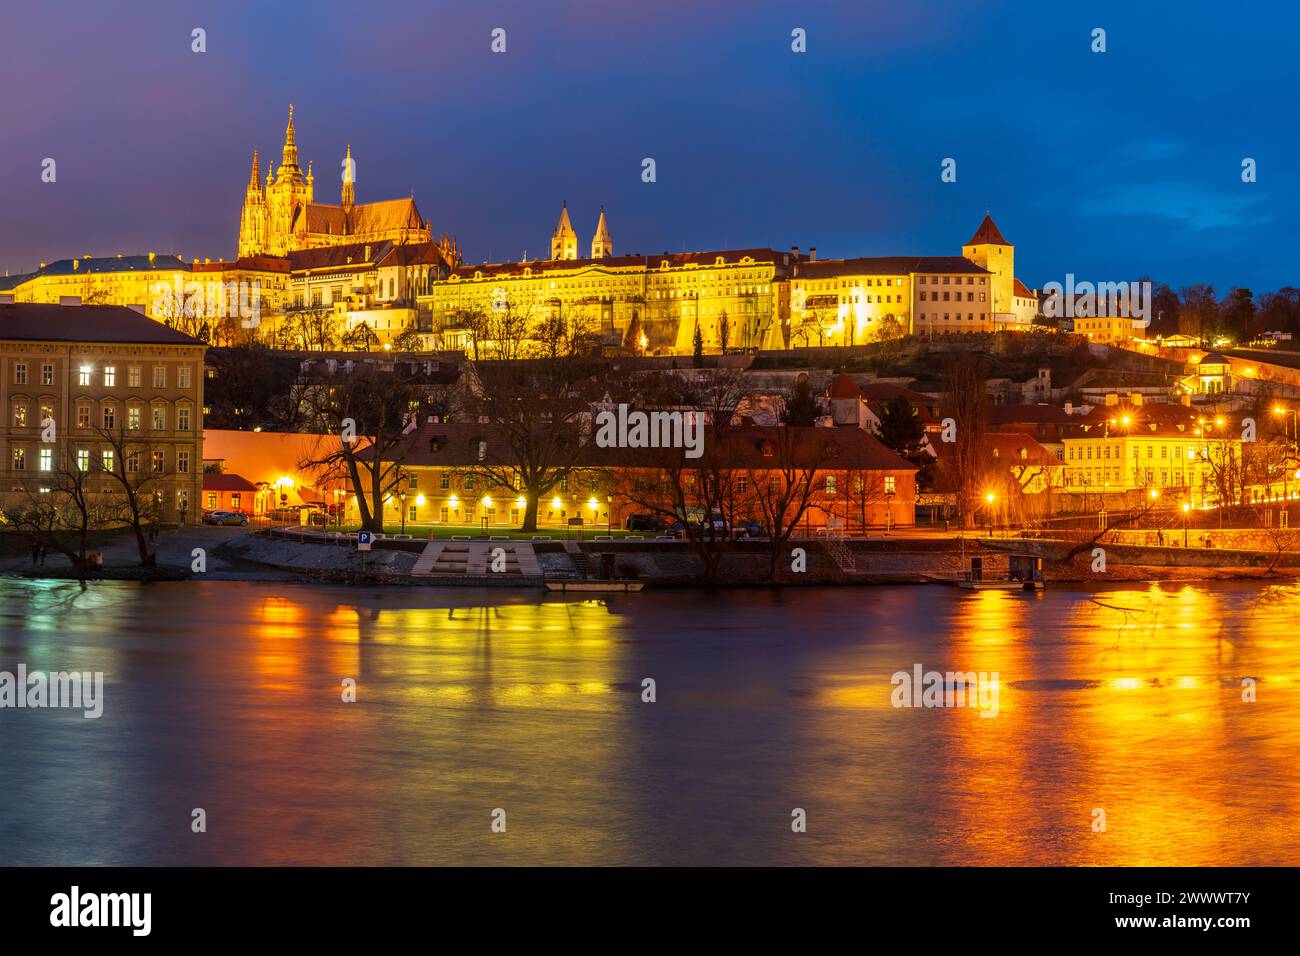 Lobkowicz Palace and St. Vitus Cathedral at night, Prague, Czech Republic Stock Photo